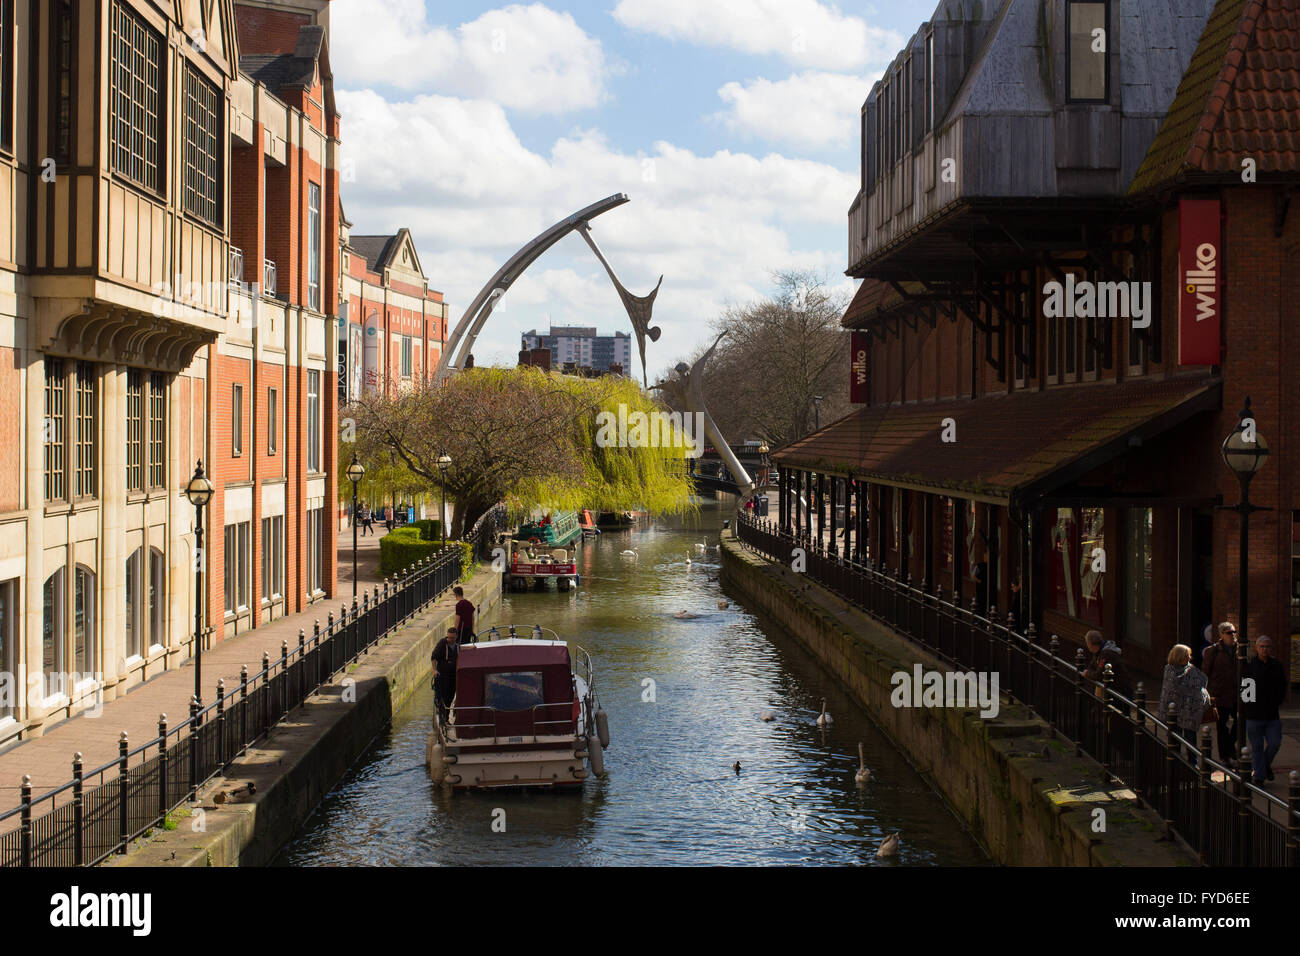 The view of Waterside North along the River Whitham in the very centre of Lincoln shopping area. Stock Photo